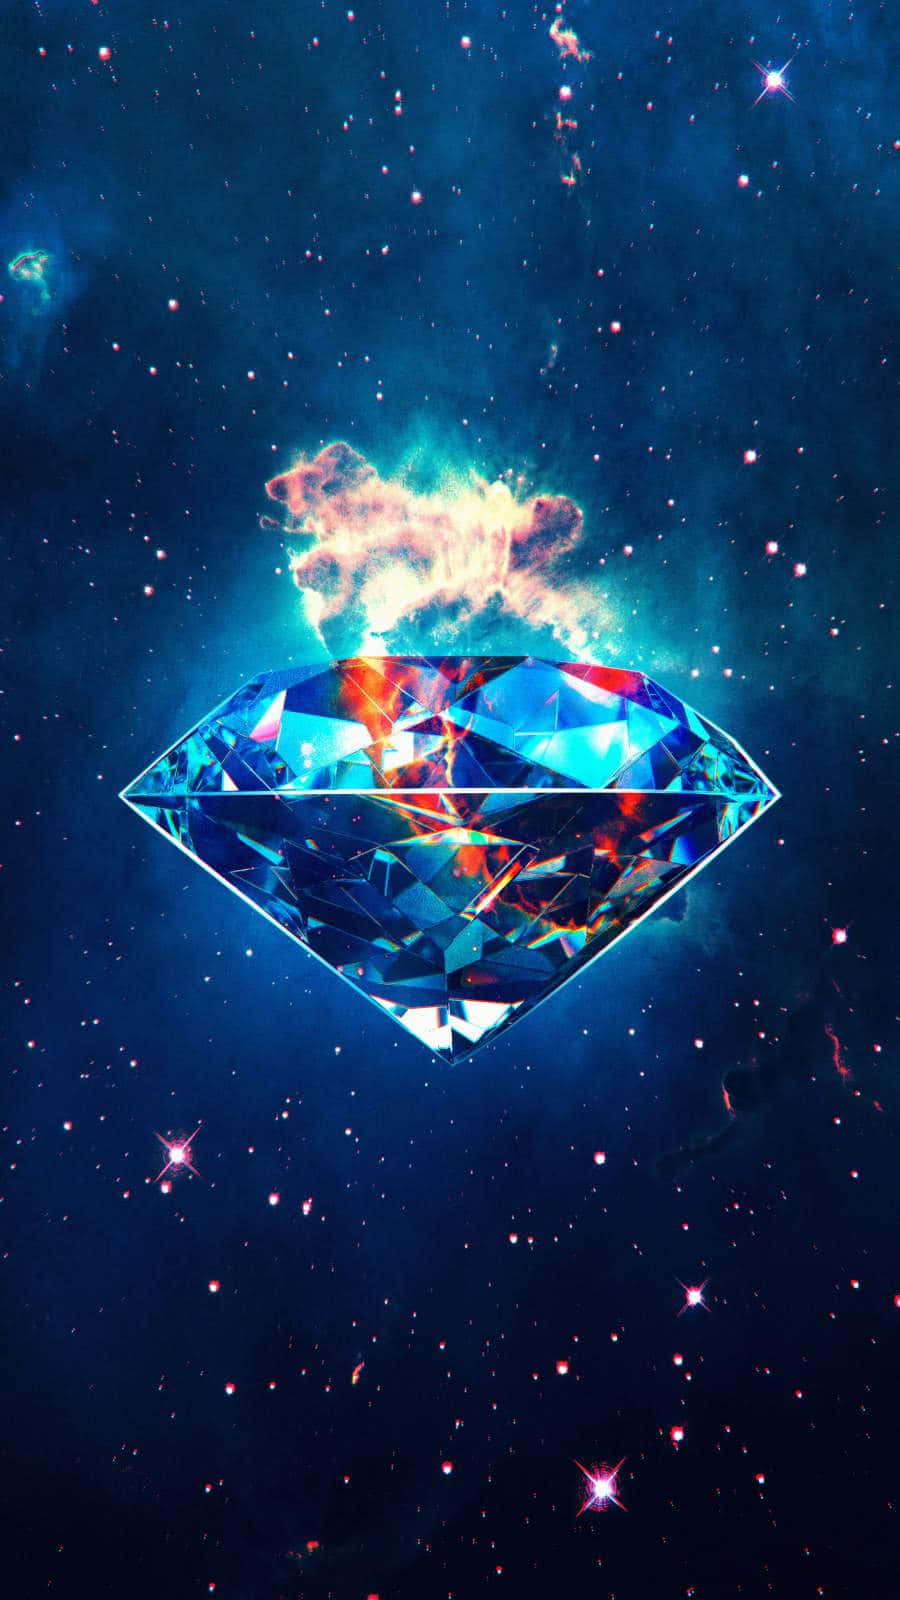 A Diamond In Space With Stars Around It Wallpaper